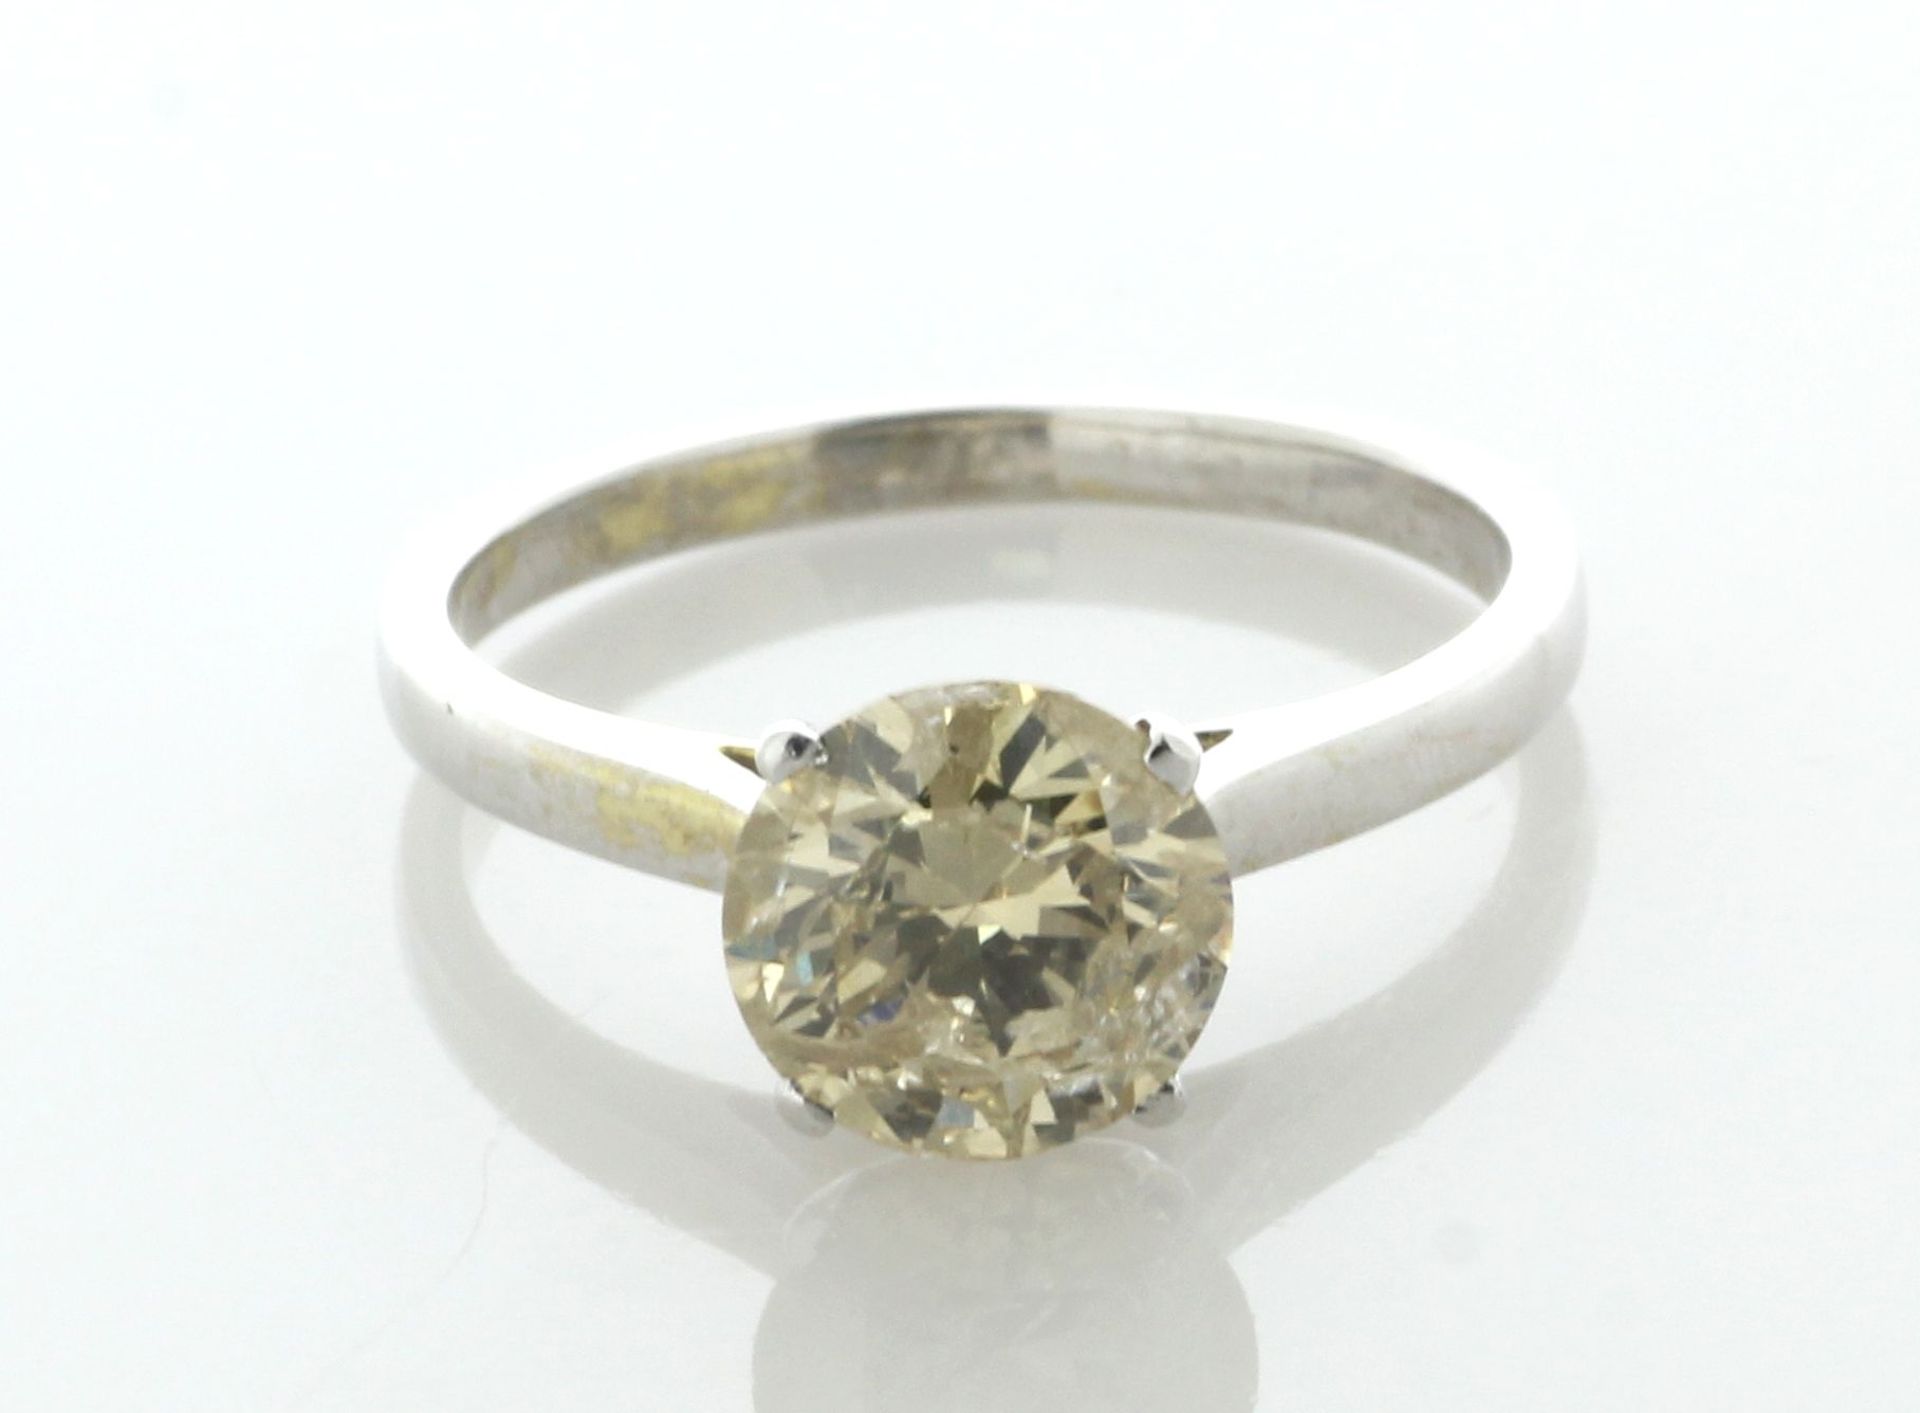 18ct White Gold Single Stone Diamond Ring 1.78 Carats - Valued By AGI £7,200.00 - One natural